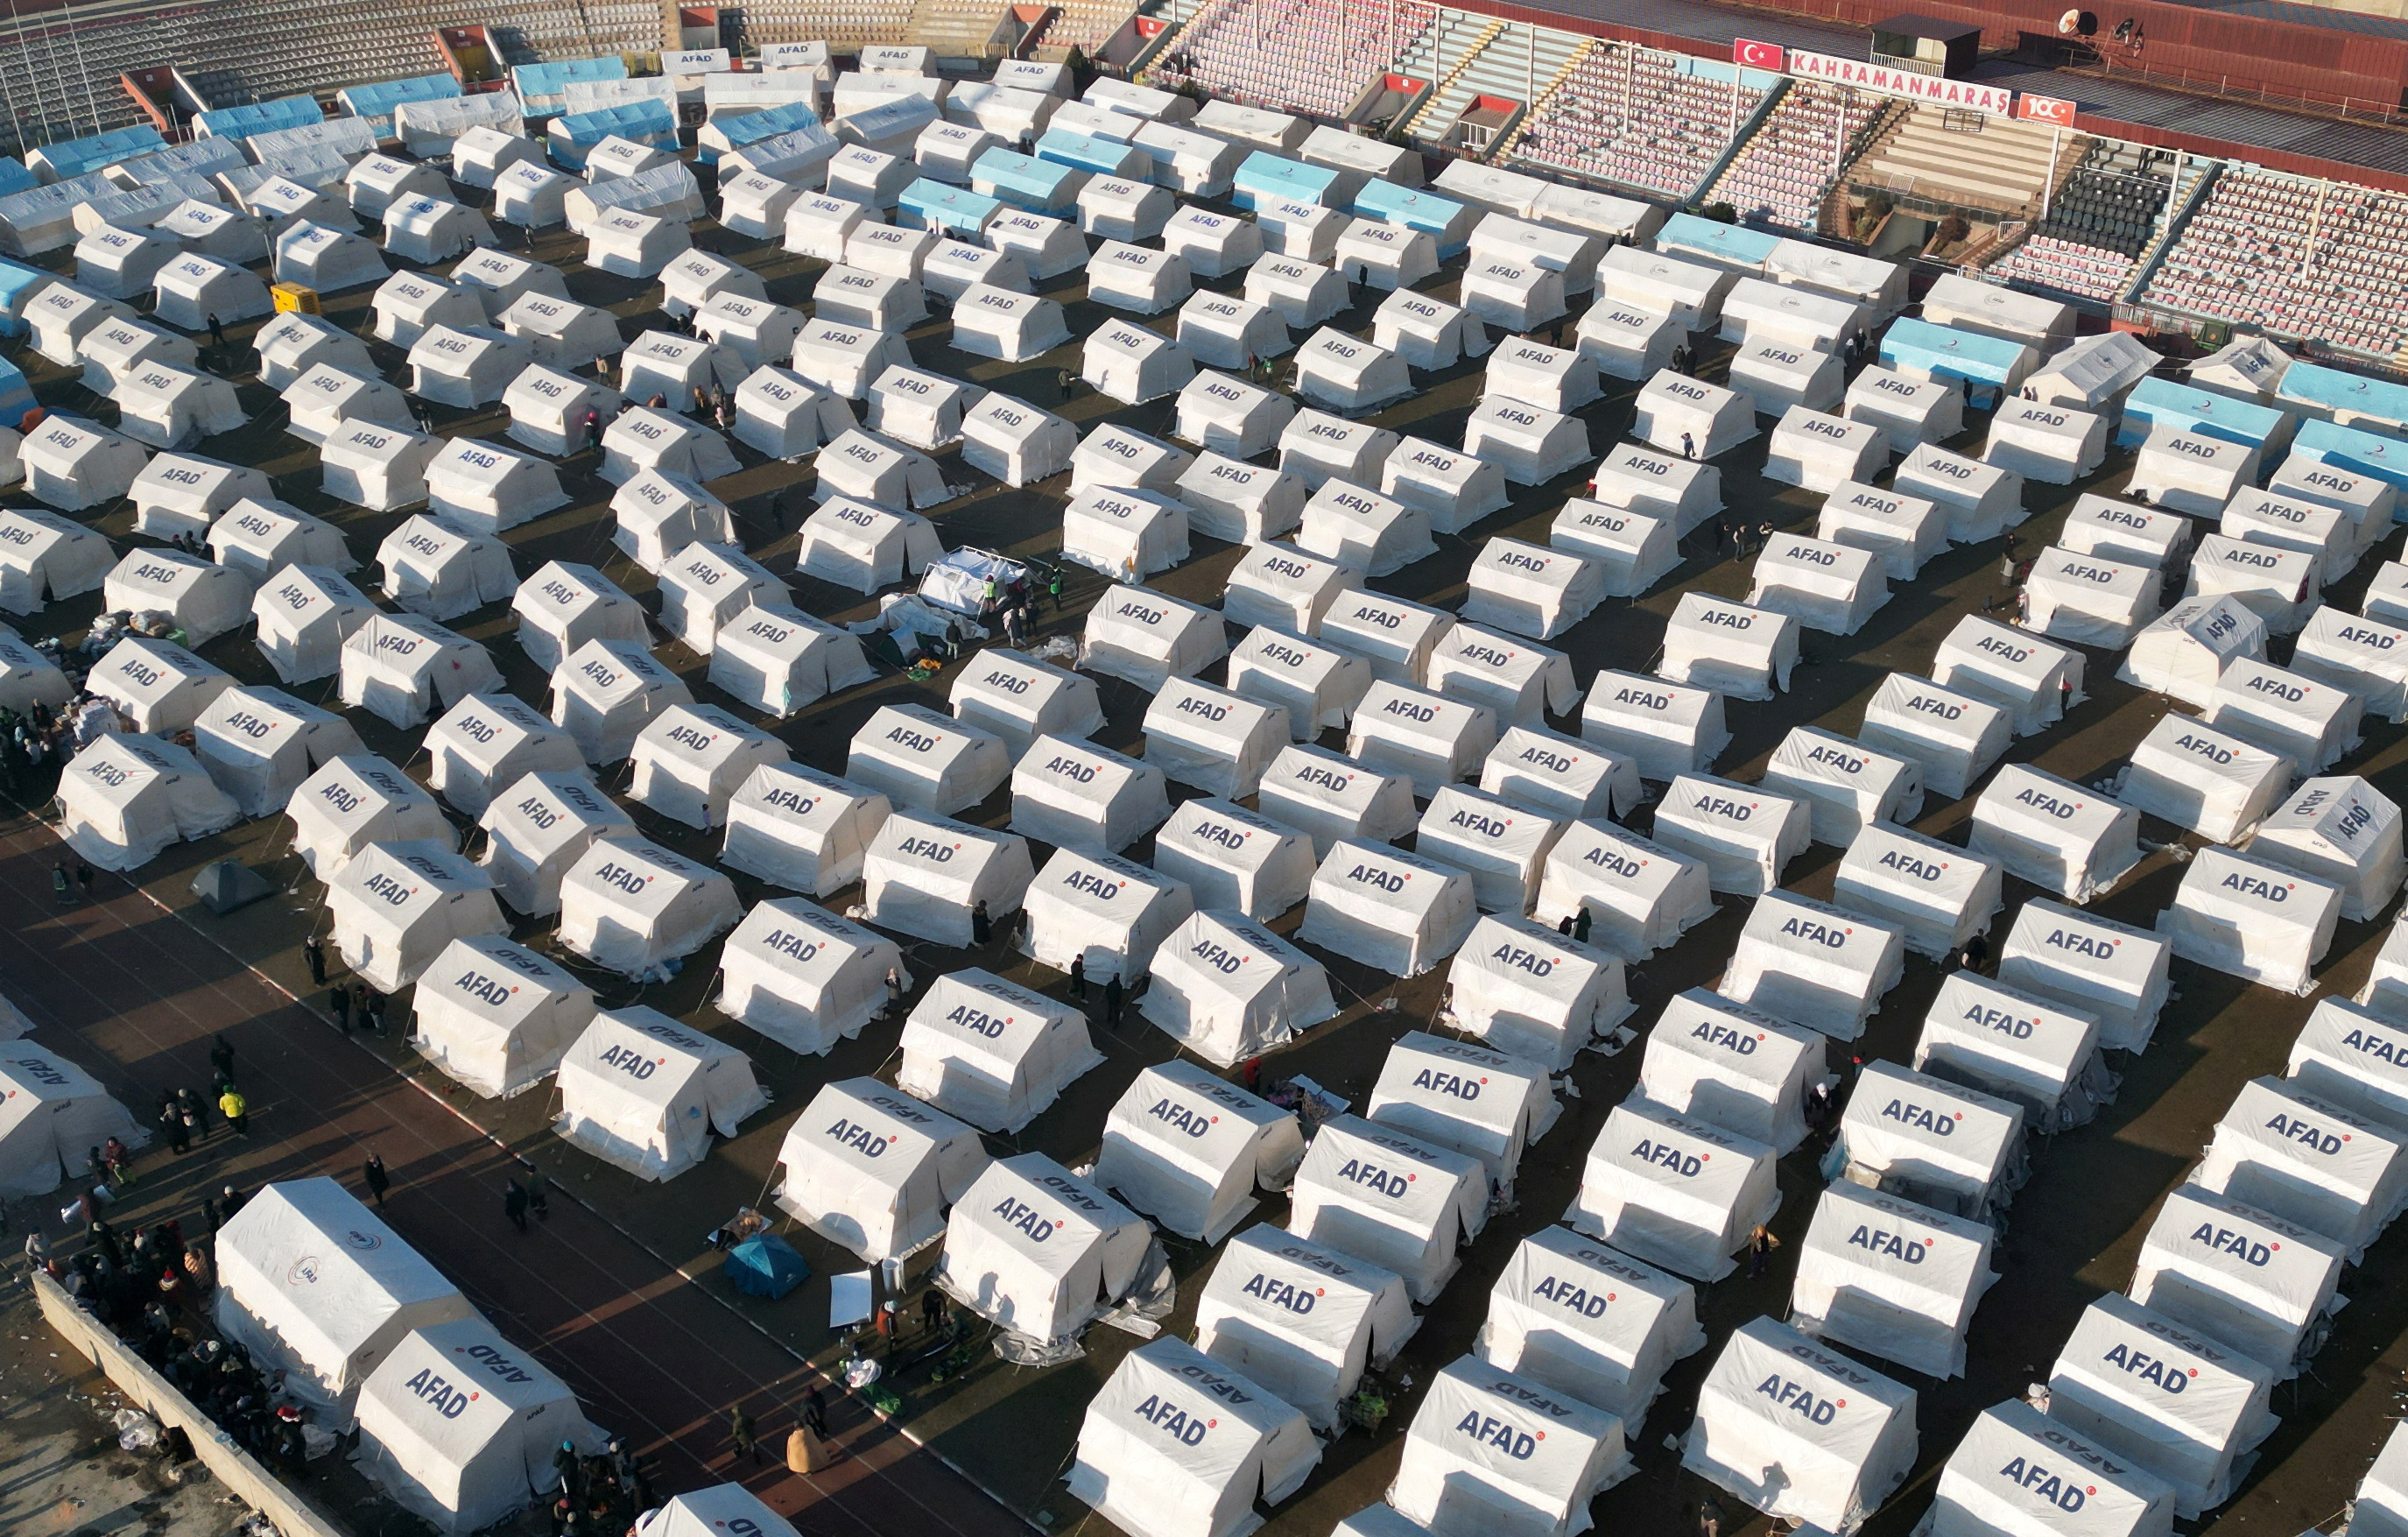 Tents are placed at a stadium in the aftermath of the deadly earthquake in Kahramanmaras